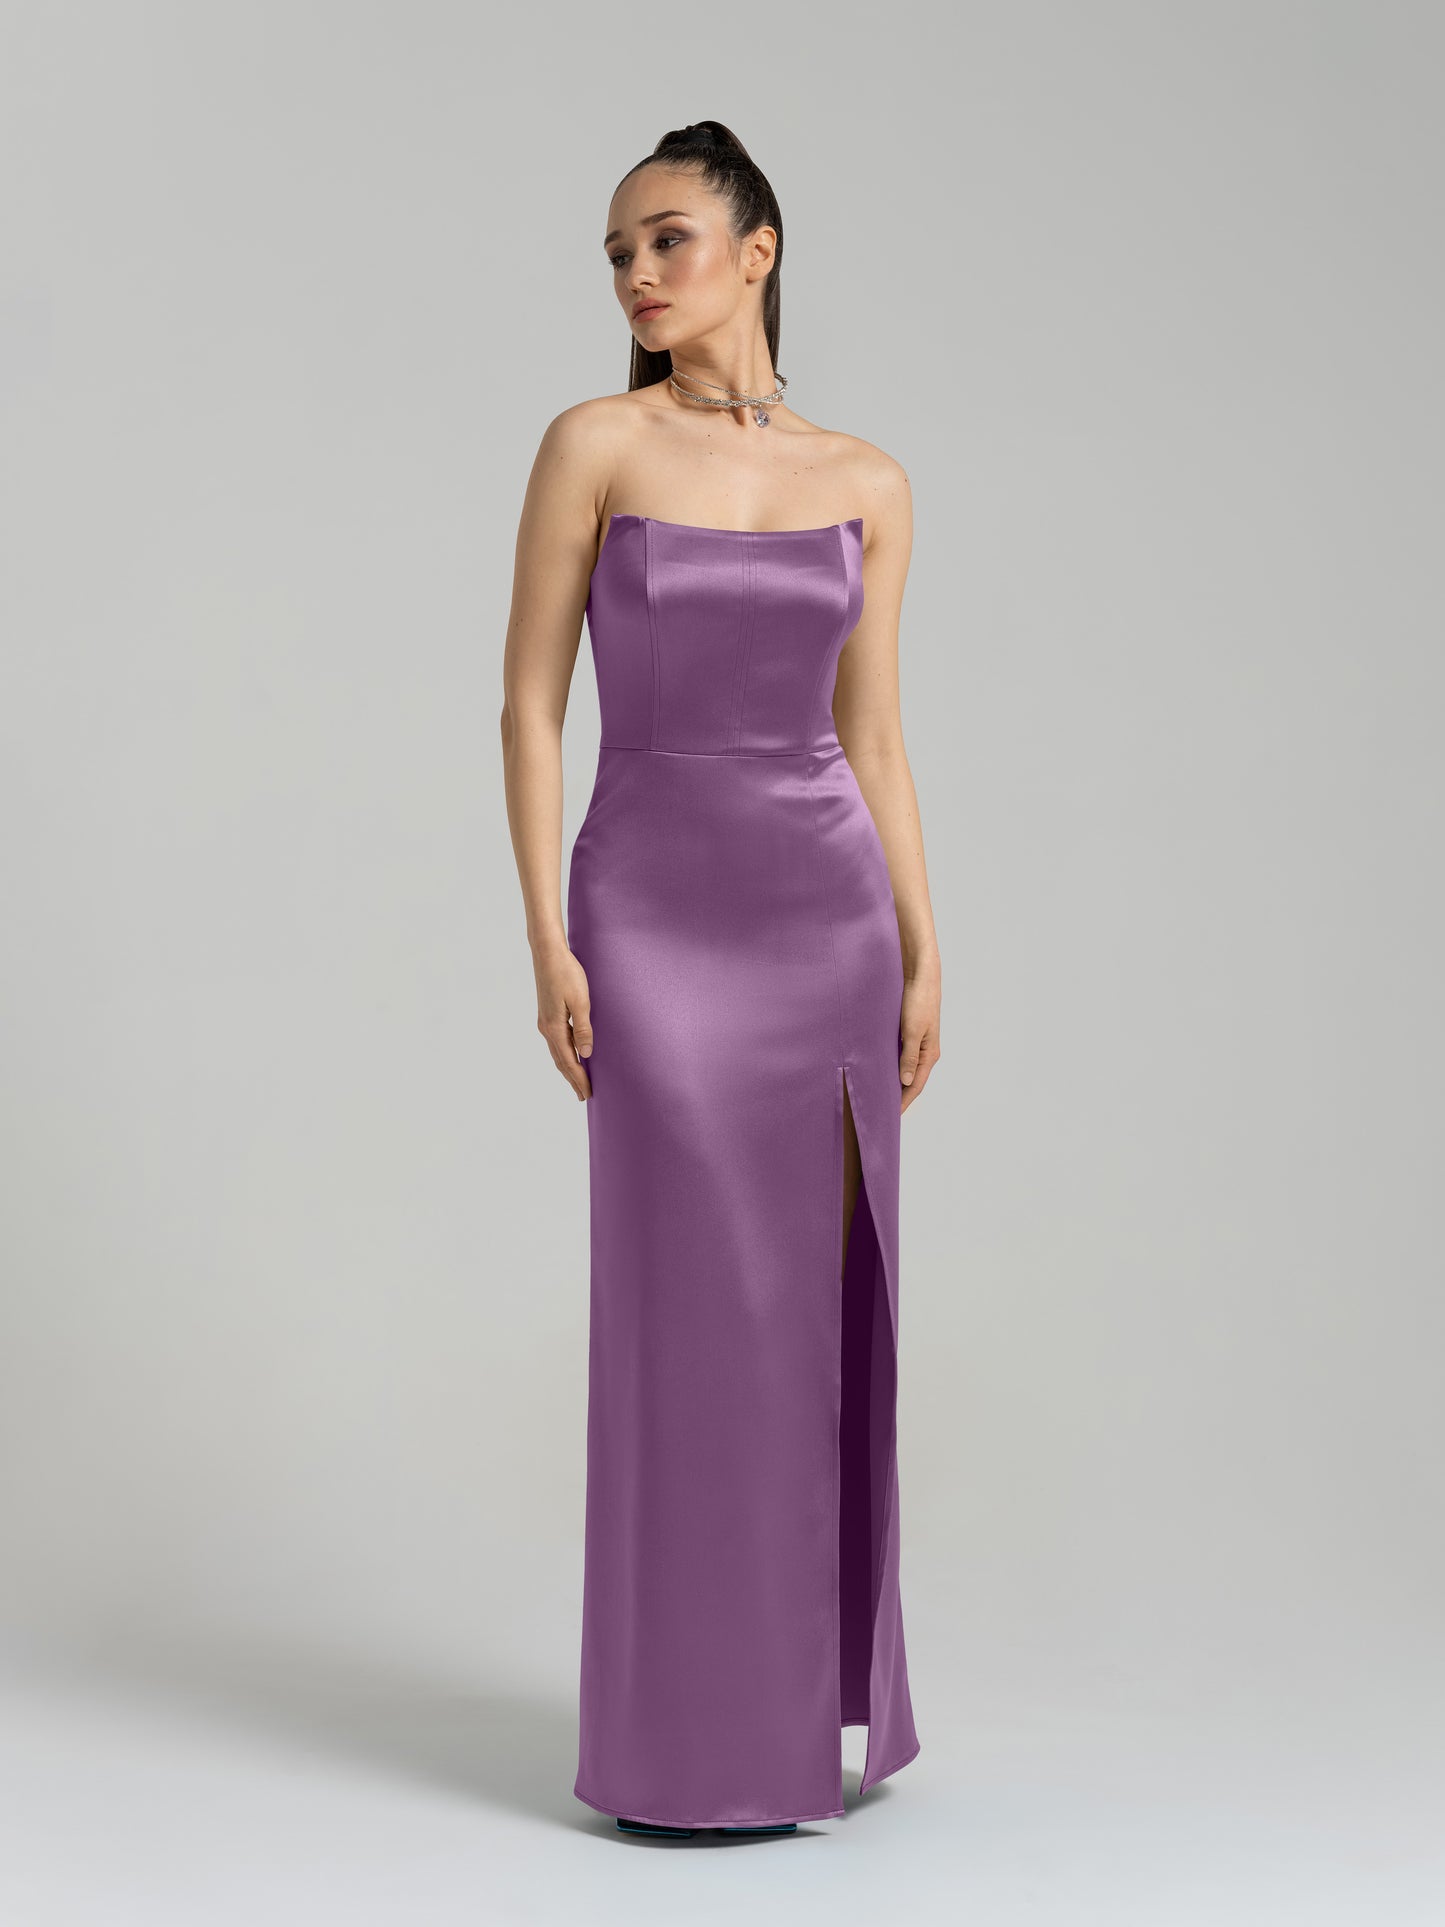 Queen of Hearts Satin Maxi Dress - Imperial Purple